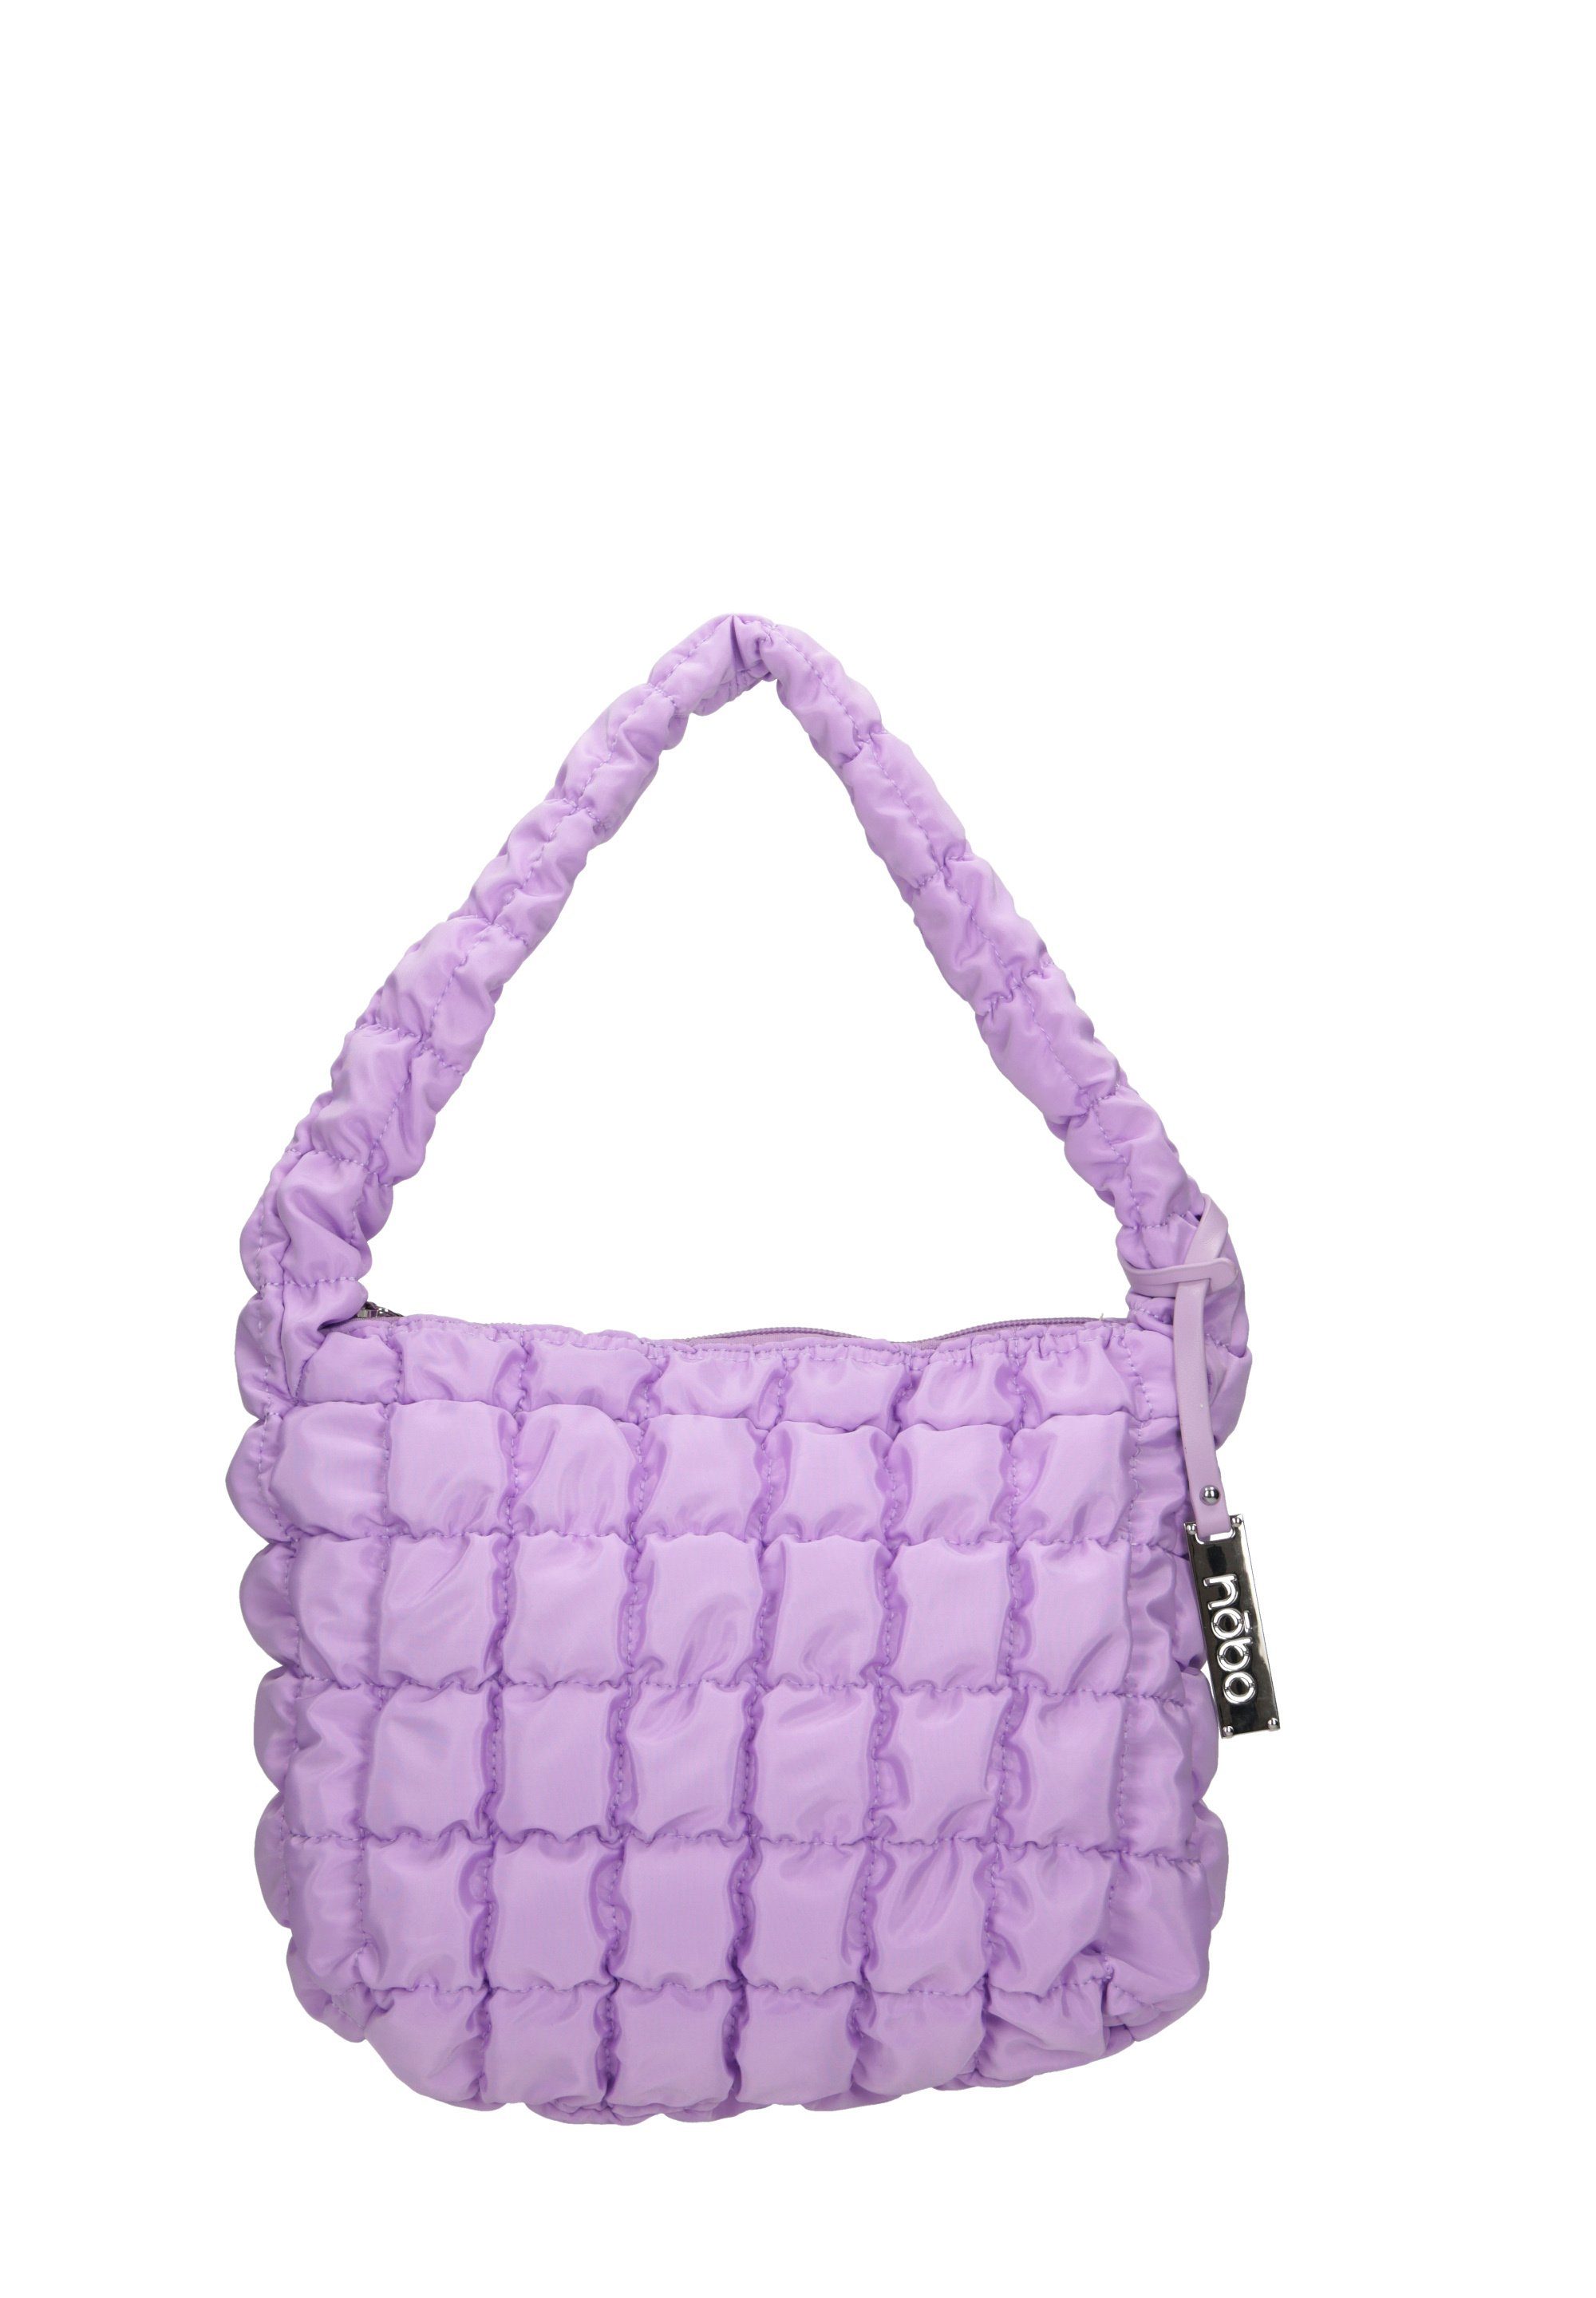 NOBO Schultertasche Quilted